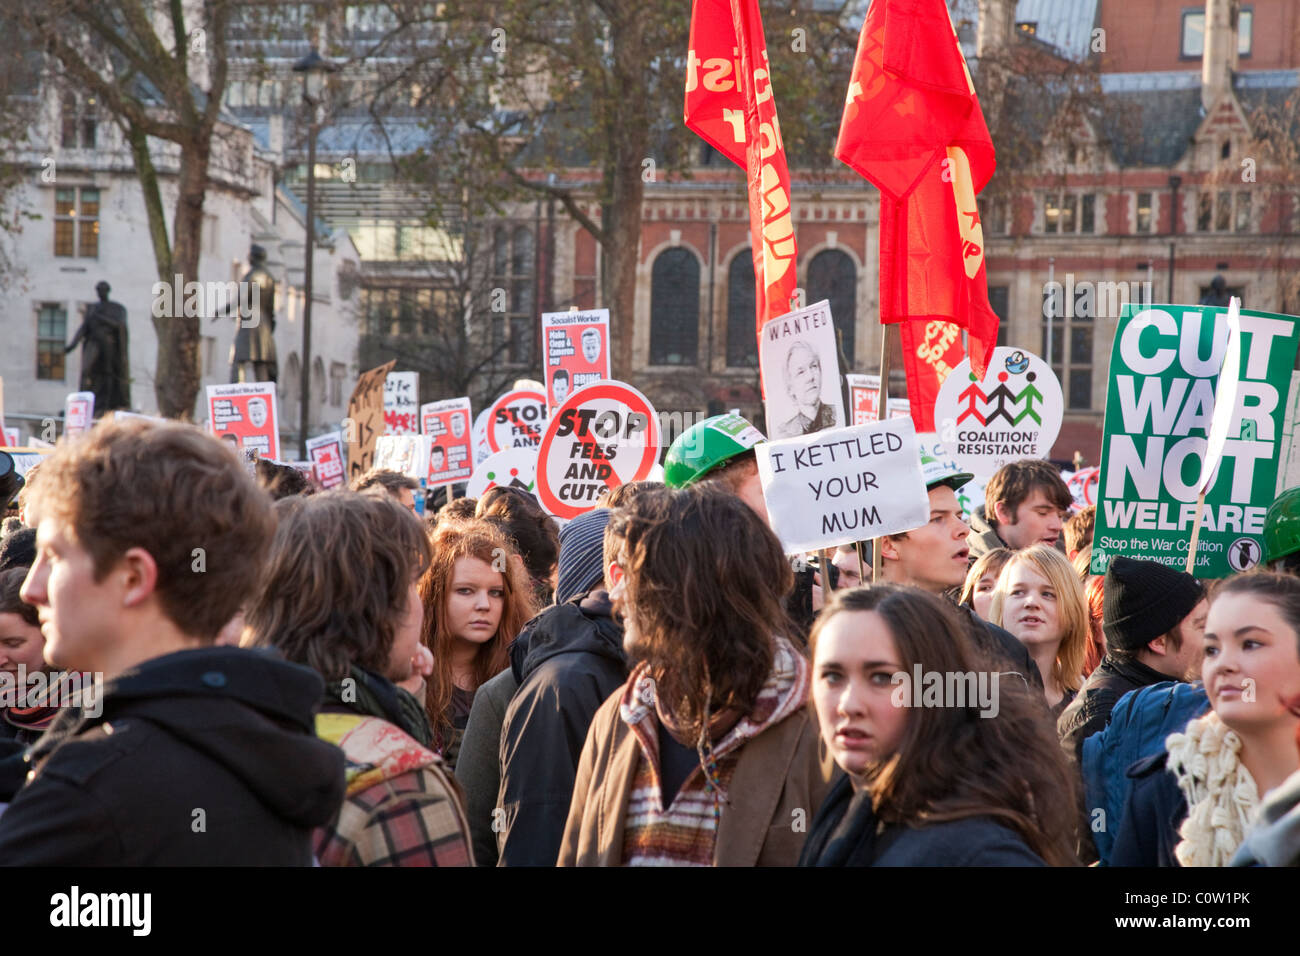 Students demonstration against tuition fees cut in Parliament Square, London on 9 December 2010 Stock Photo